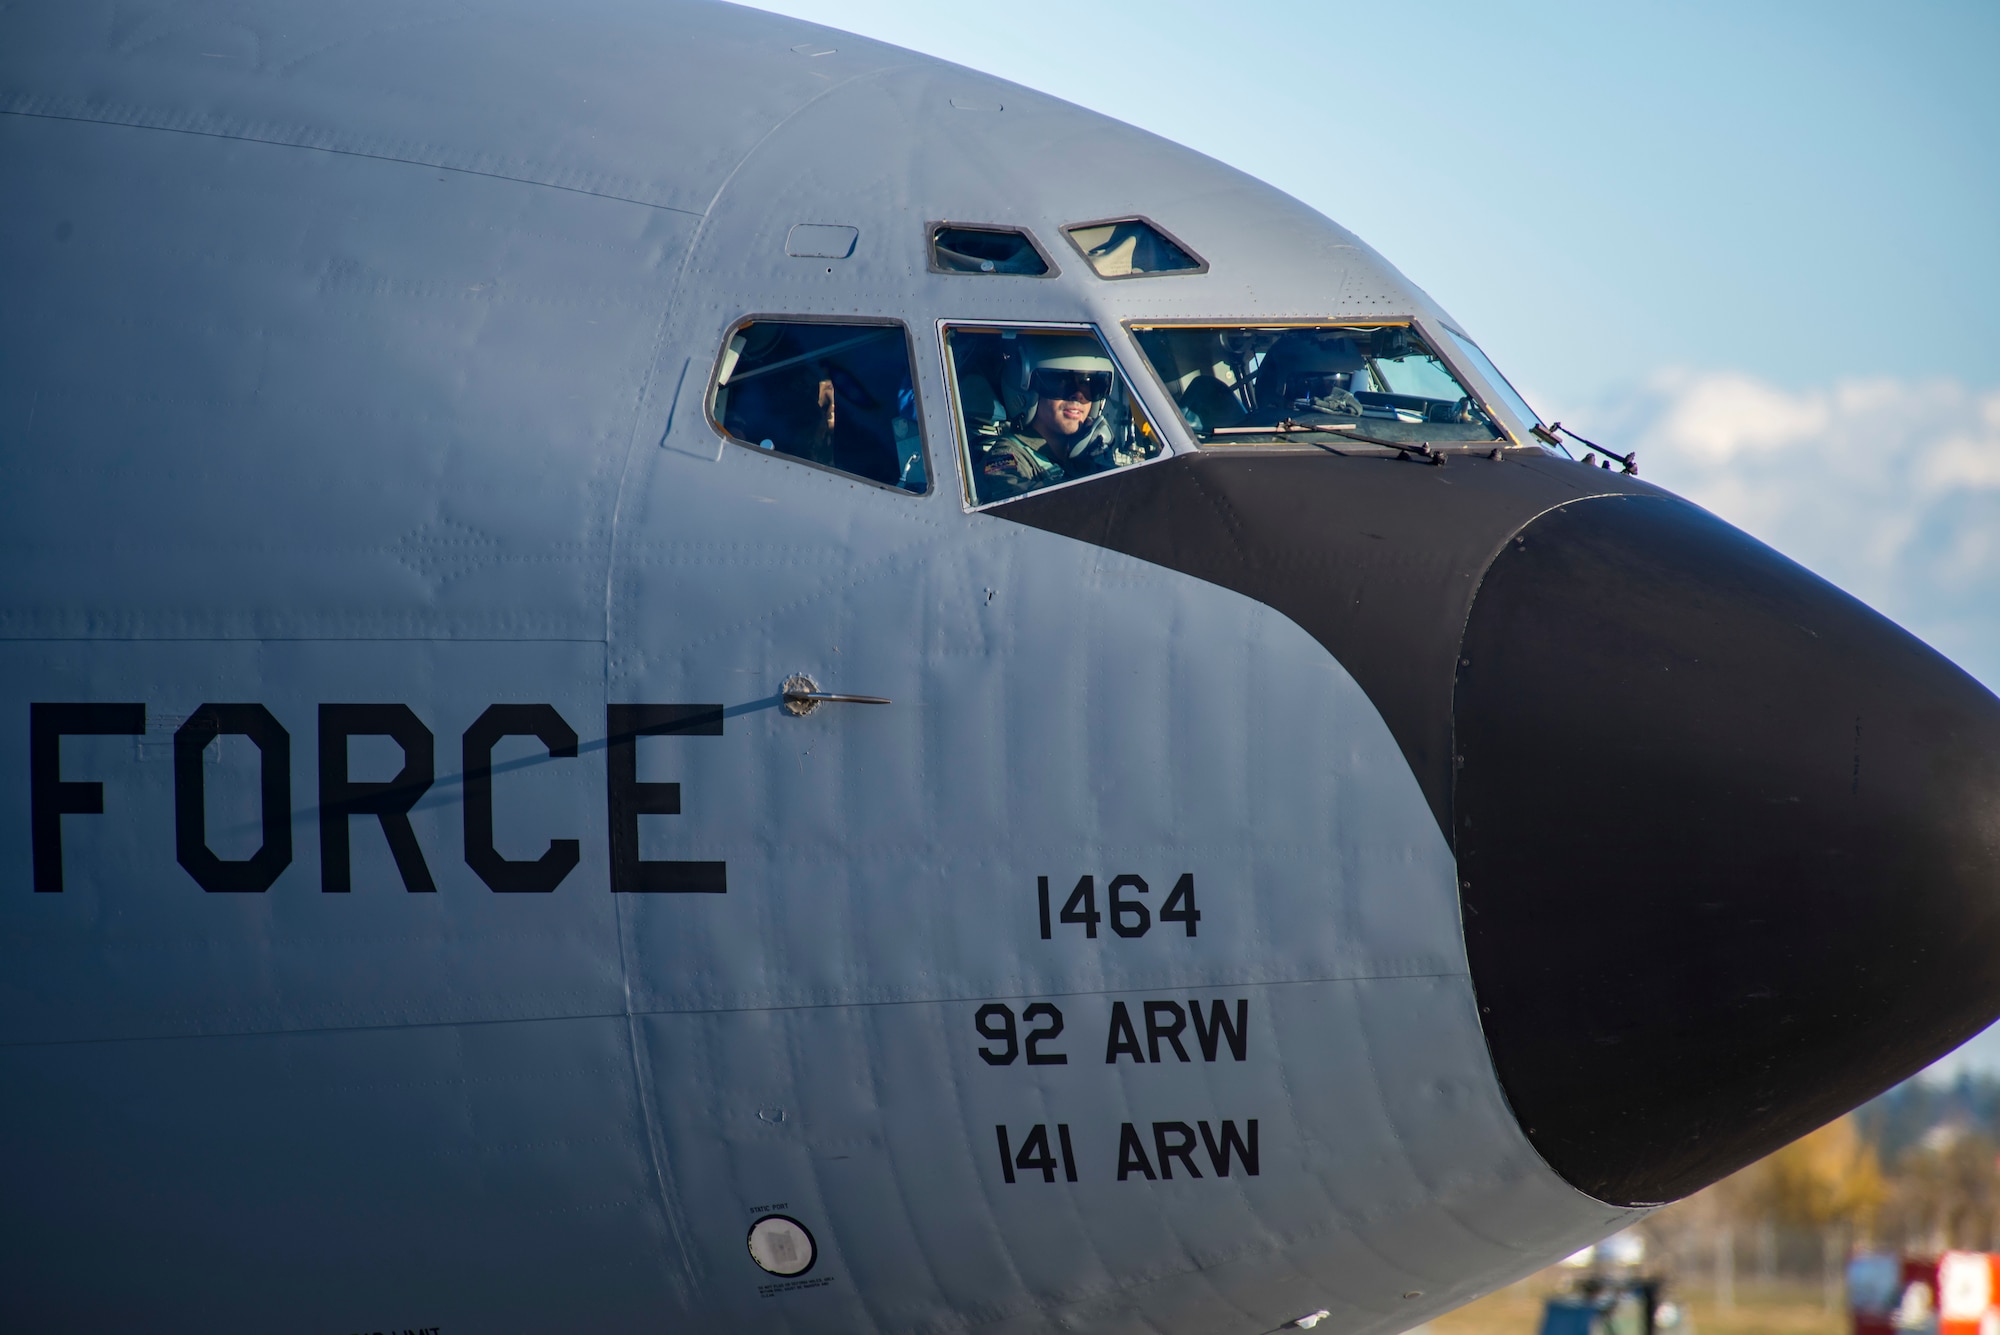 A U.S. Air Force KC-135 Stratotanker taxies during a simulated alert response during Exercise Global Thunder at Fairchild Air Force Base, Washington, Oct. 22, 2019. Global Thunder is an annual command and control exercise designed to train U.S. Strategic Command forces and assess joint operational readiness. (U.S. Air Force photo by Airman 1st Class Lawrence Sena)